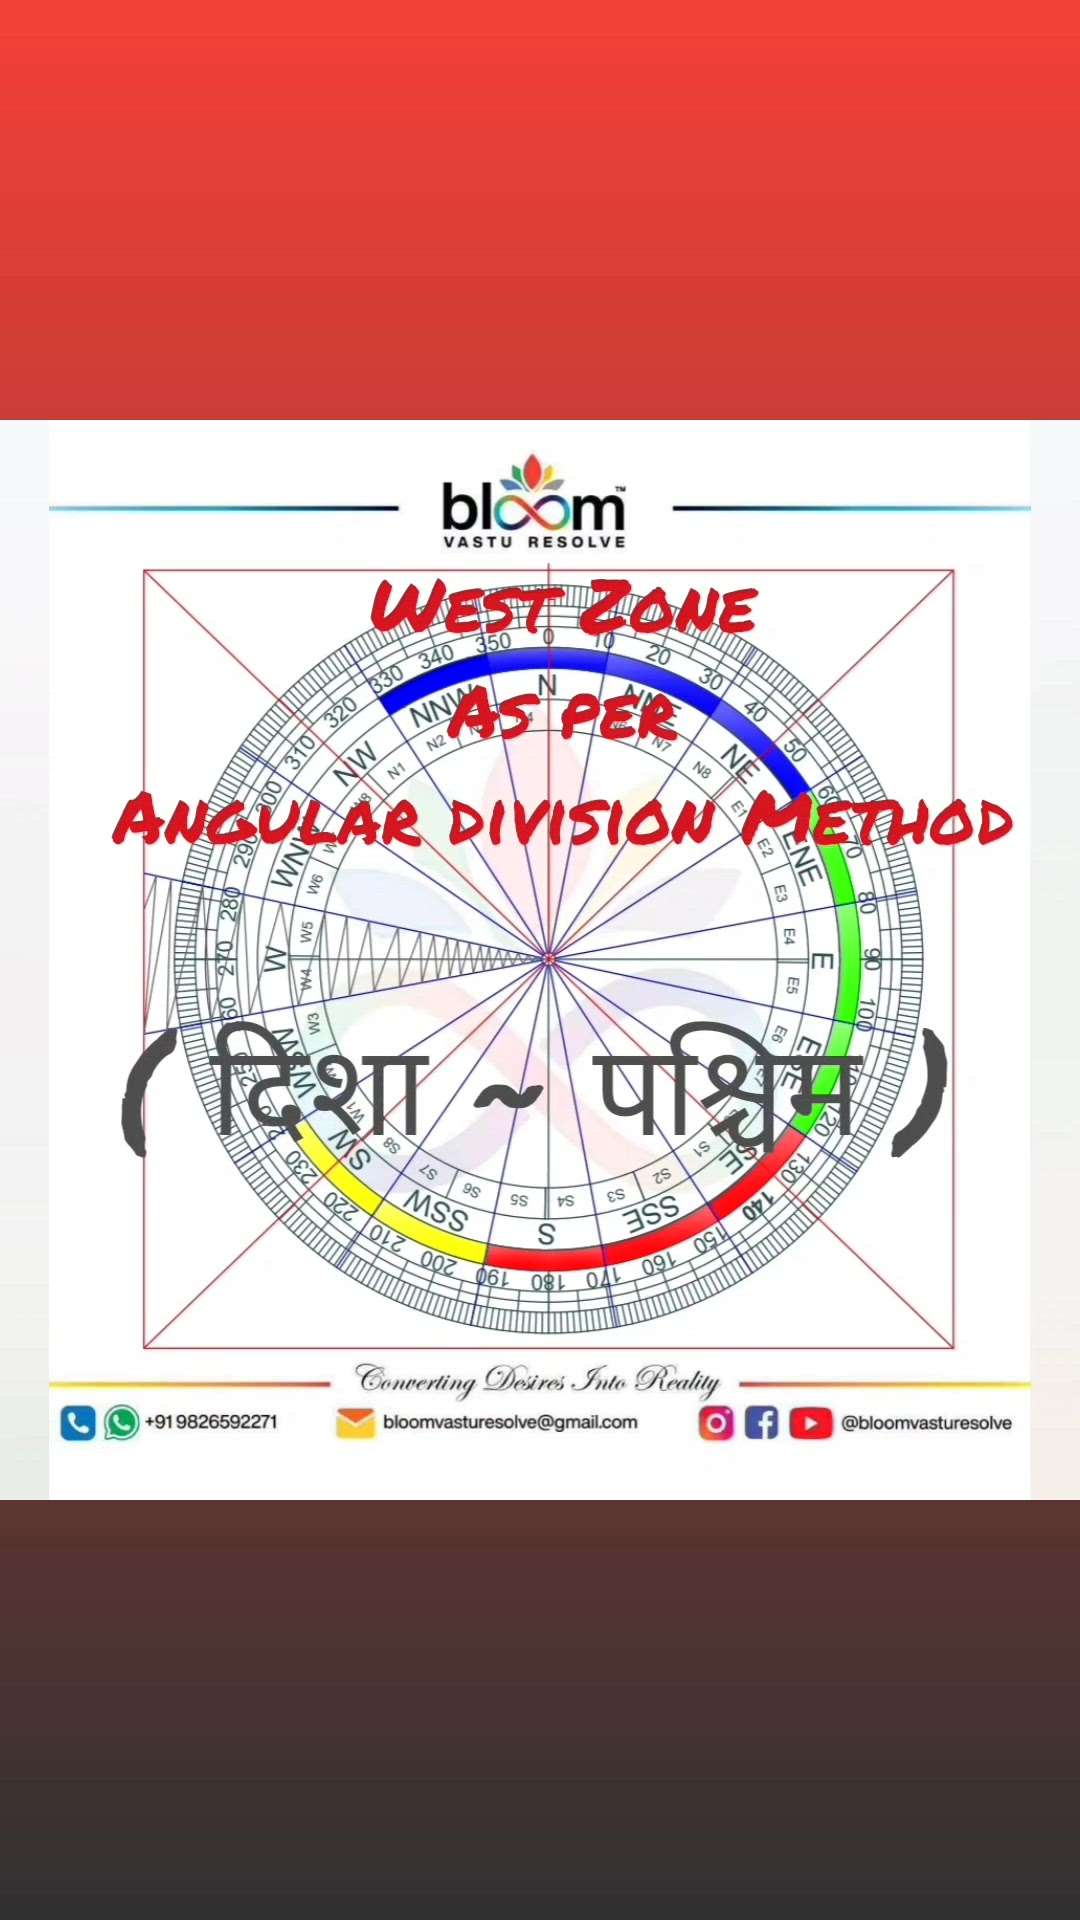 Your queries and comments are always welcome.
For more Vastu please follow @bloomvasturesolve
on YouTube, Instagram & Facebook
.
.
For personal consultation, feel free to contact certified MahaVastu Expert through
M - 9826592271
Or
bloomvasturesolve@gmail.com

#vastu 
#mahavastu #mahavastuexpert
#bloomvasturesolve
#vastuforhome
#vastuforbusiness
#vastutips 
#westzone